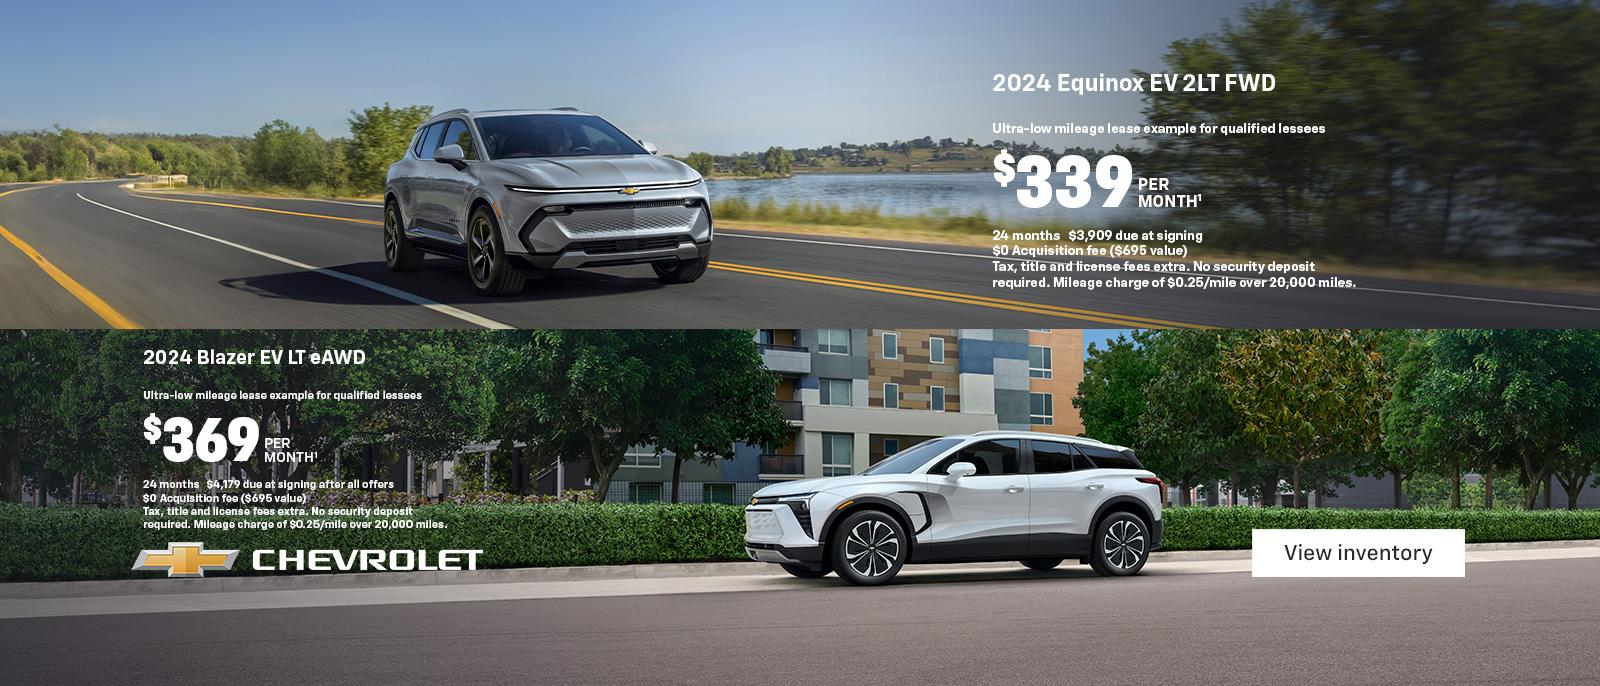 2024 Equinox EV 2LT FWD. Ultra-low mileage lease example for qualified lessees. $339 per month. 24 months. $3,909 due at signing. $0 Acquisition fee ($695 value). Tax, title and license fees extra. No security deposit required. Mileage charge of $0.25/mile over 20,000 miles. 2024 Blazer EV LT eAWD. Ultra-low mileage lease example for qualified lessees with a current eligible lease. $369 per month. 24 months. $3,179 due at signing after all offers. $0 Acquisition fee ($695 value). Tax, title and license fees extra. No security deposit required. Mileage charge of $0.25/mile over 20,000 miles.